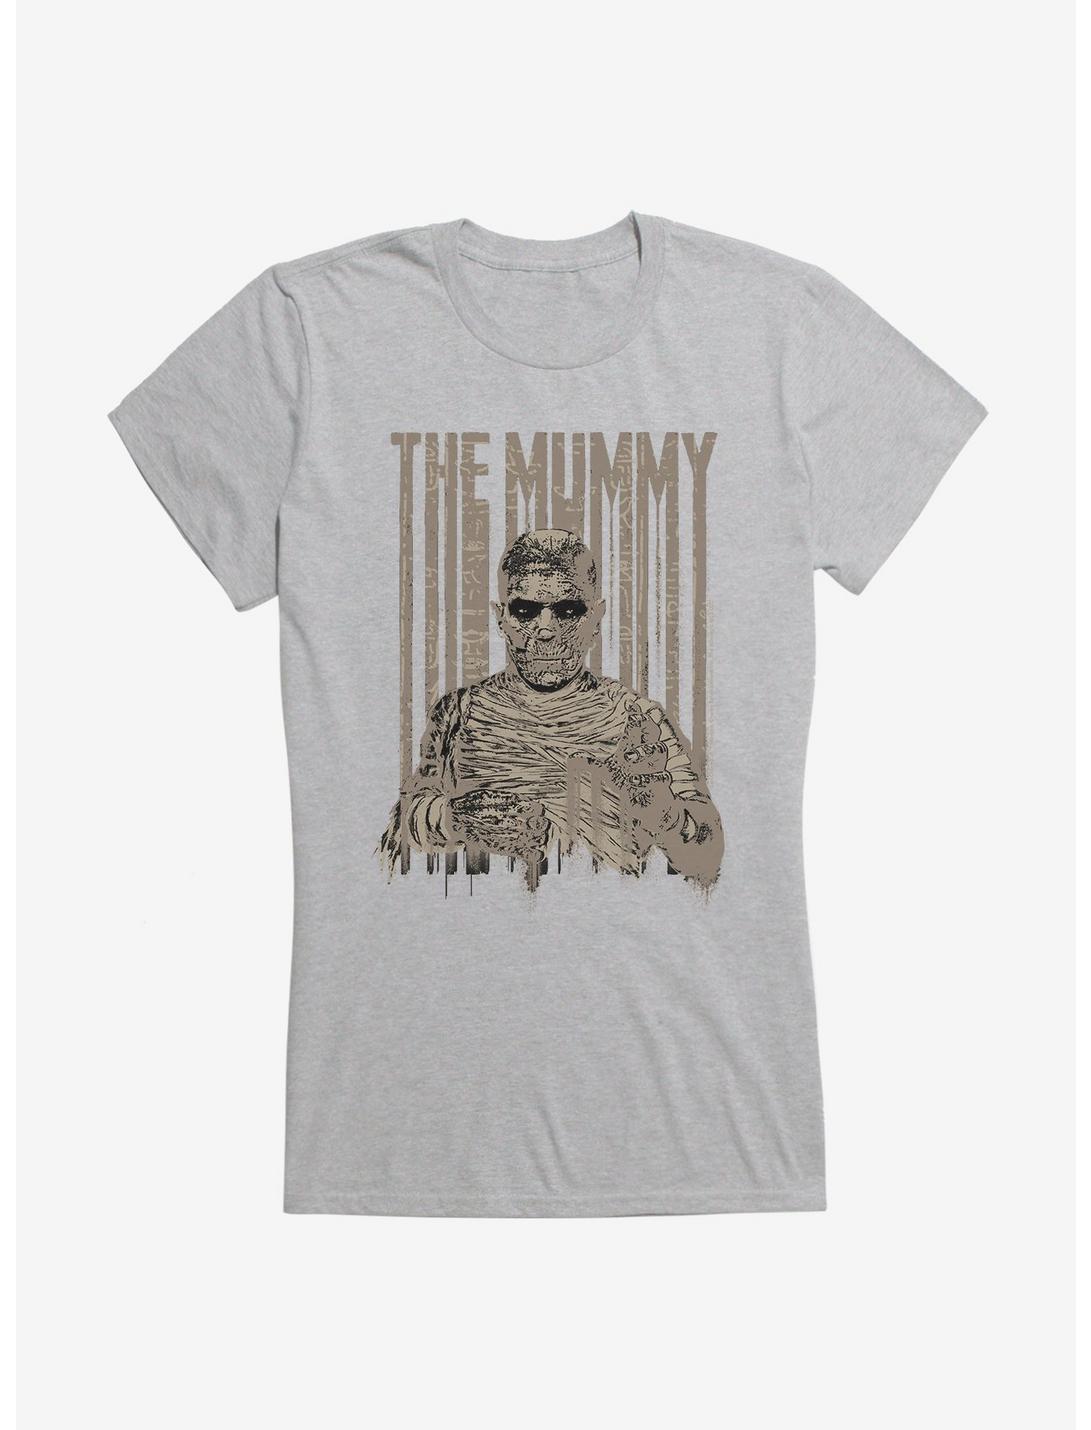 Universal Monsters The Mummy Wraps Second Color Girls T-Shirt, , hi-res